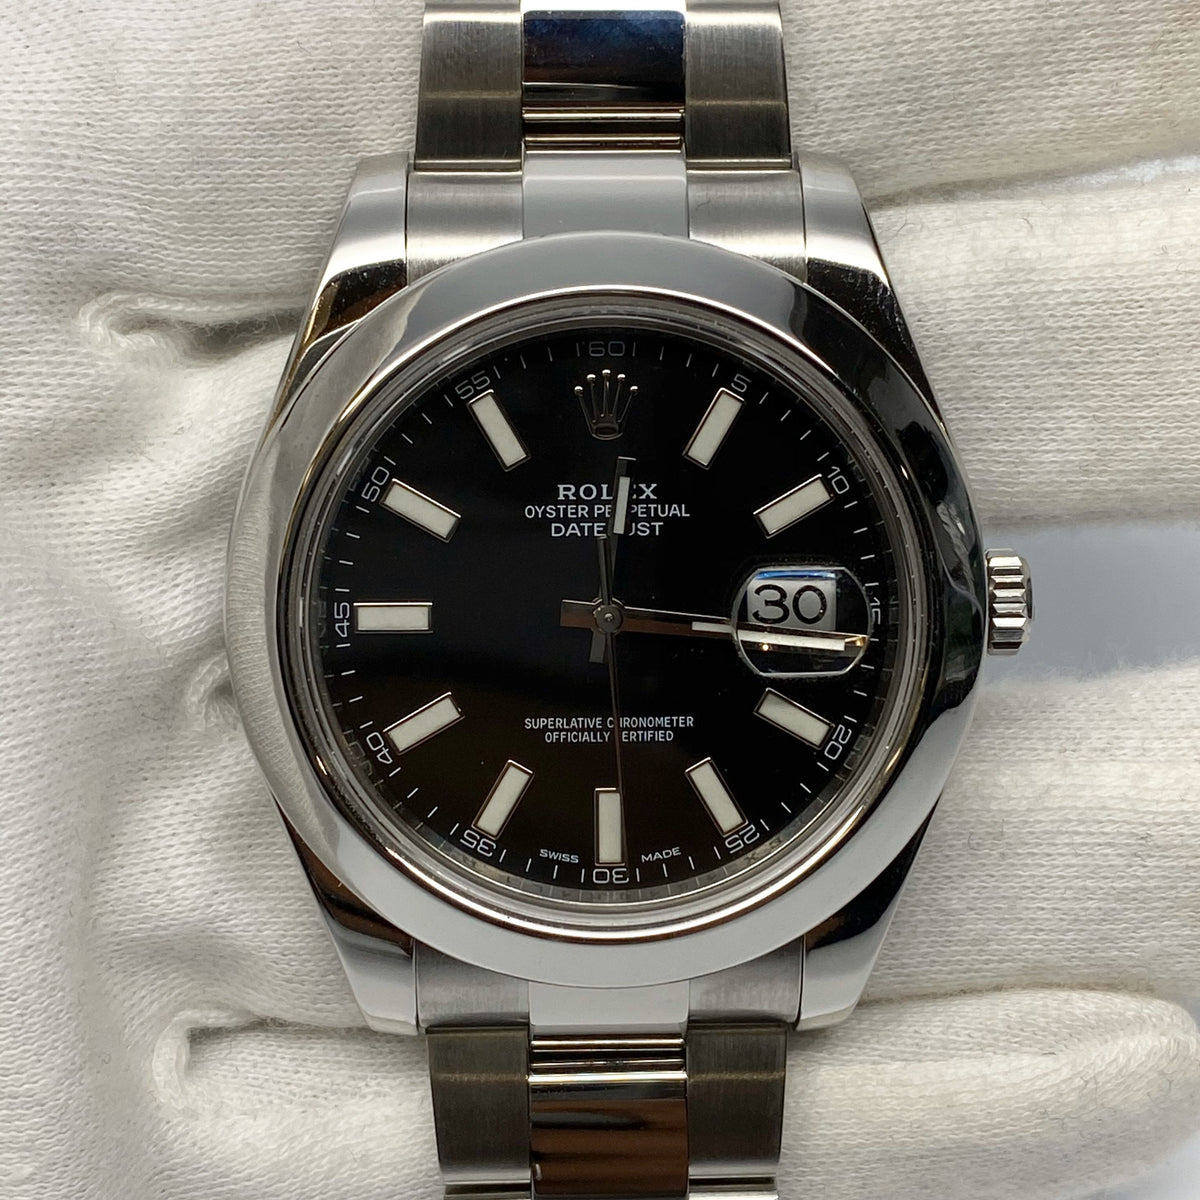 Rolex Datejust II Ref 116300 Available 